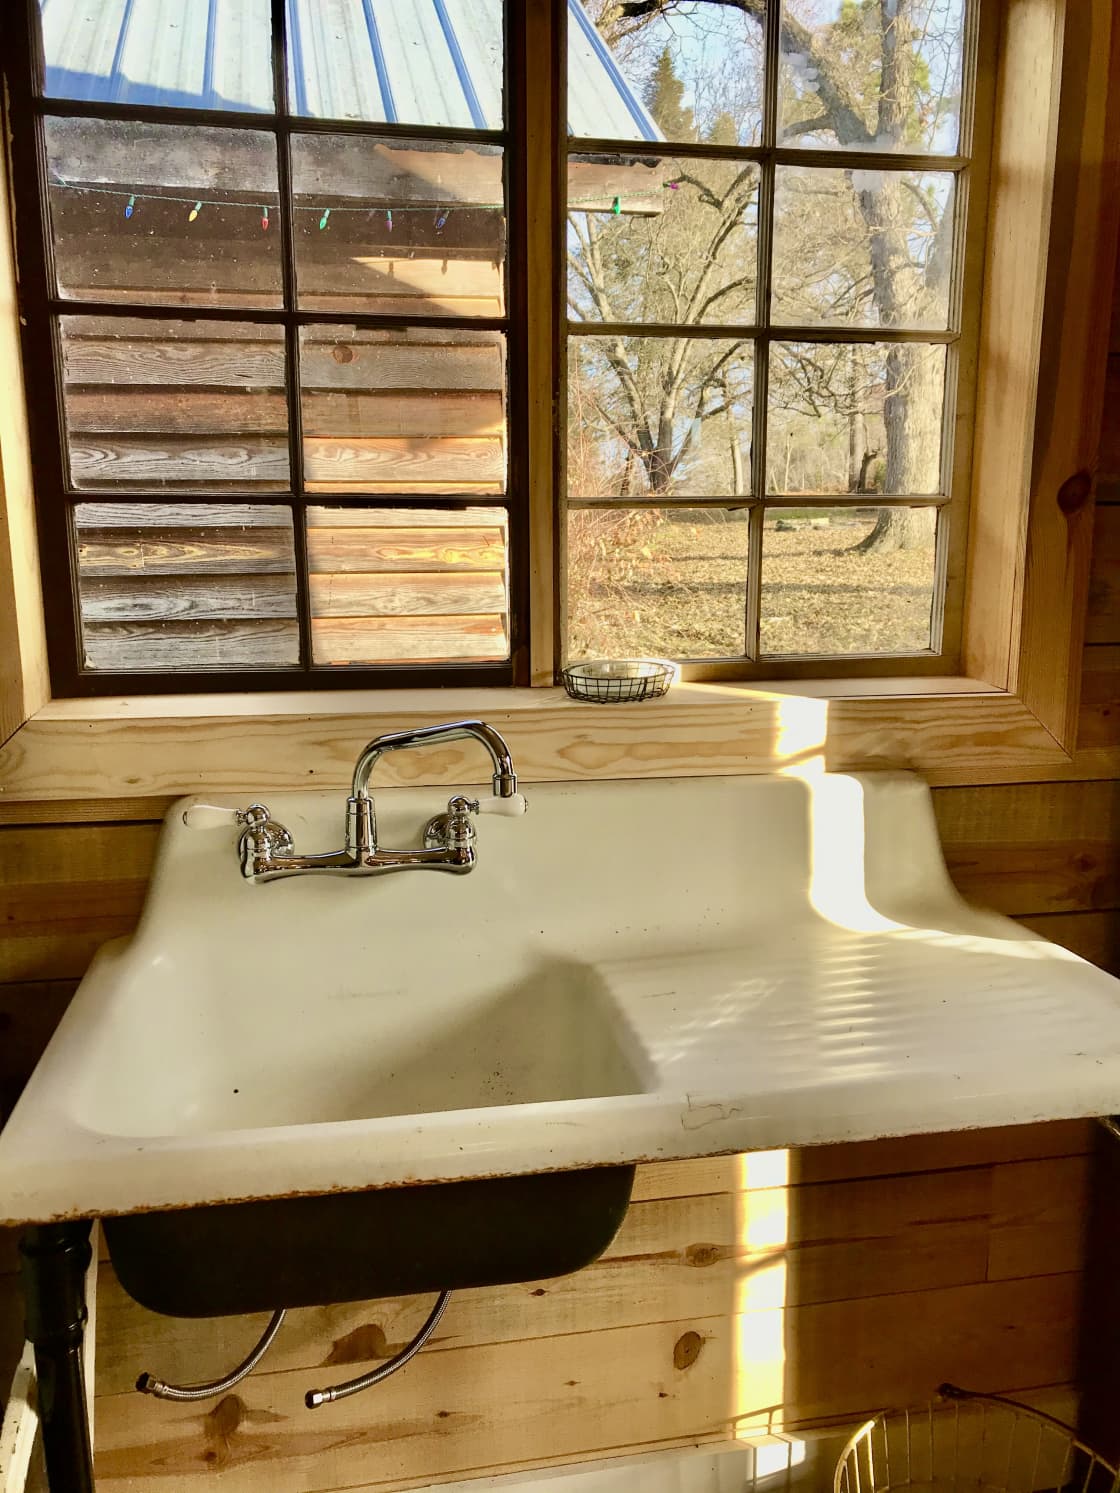 Our antique porcelain sink in the main Farm Store that can be used for preparing simple meals for the grill or wood stove. 